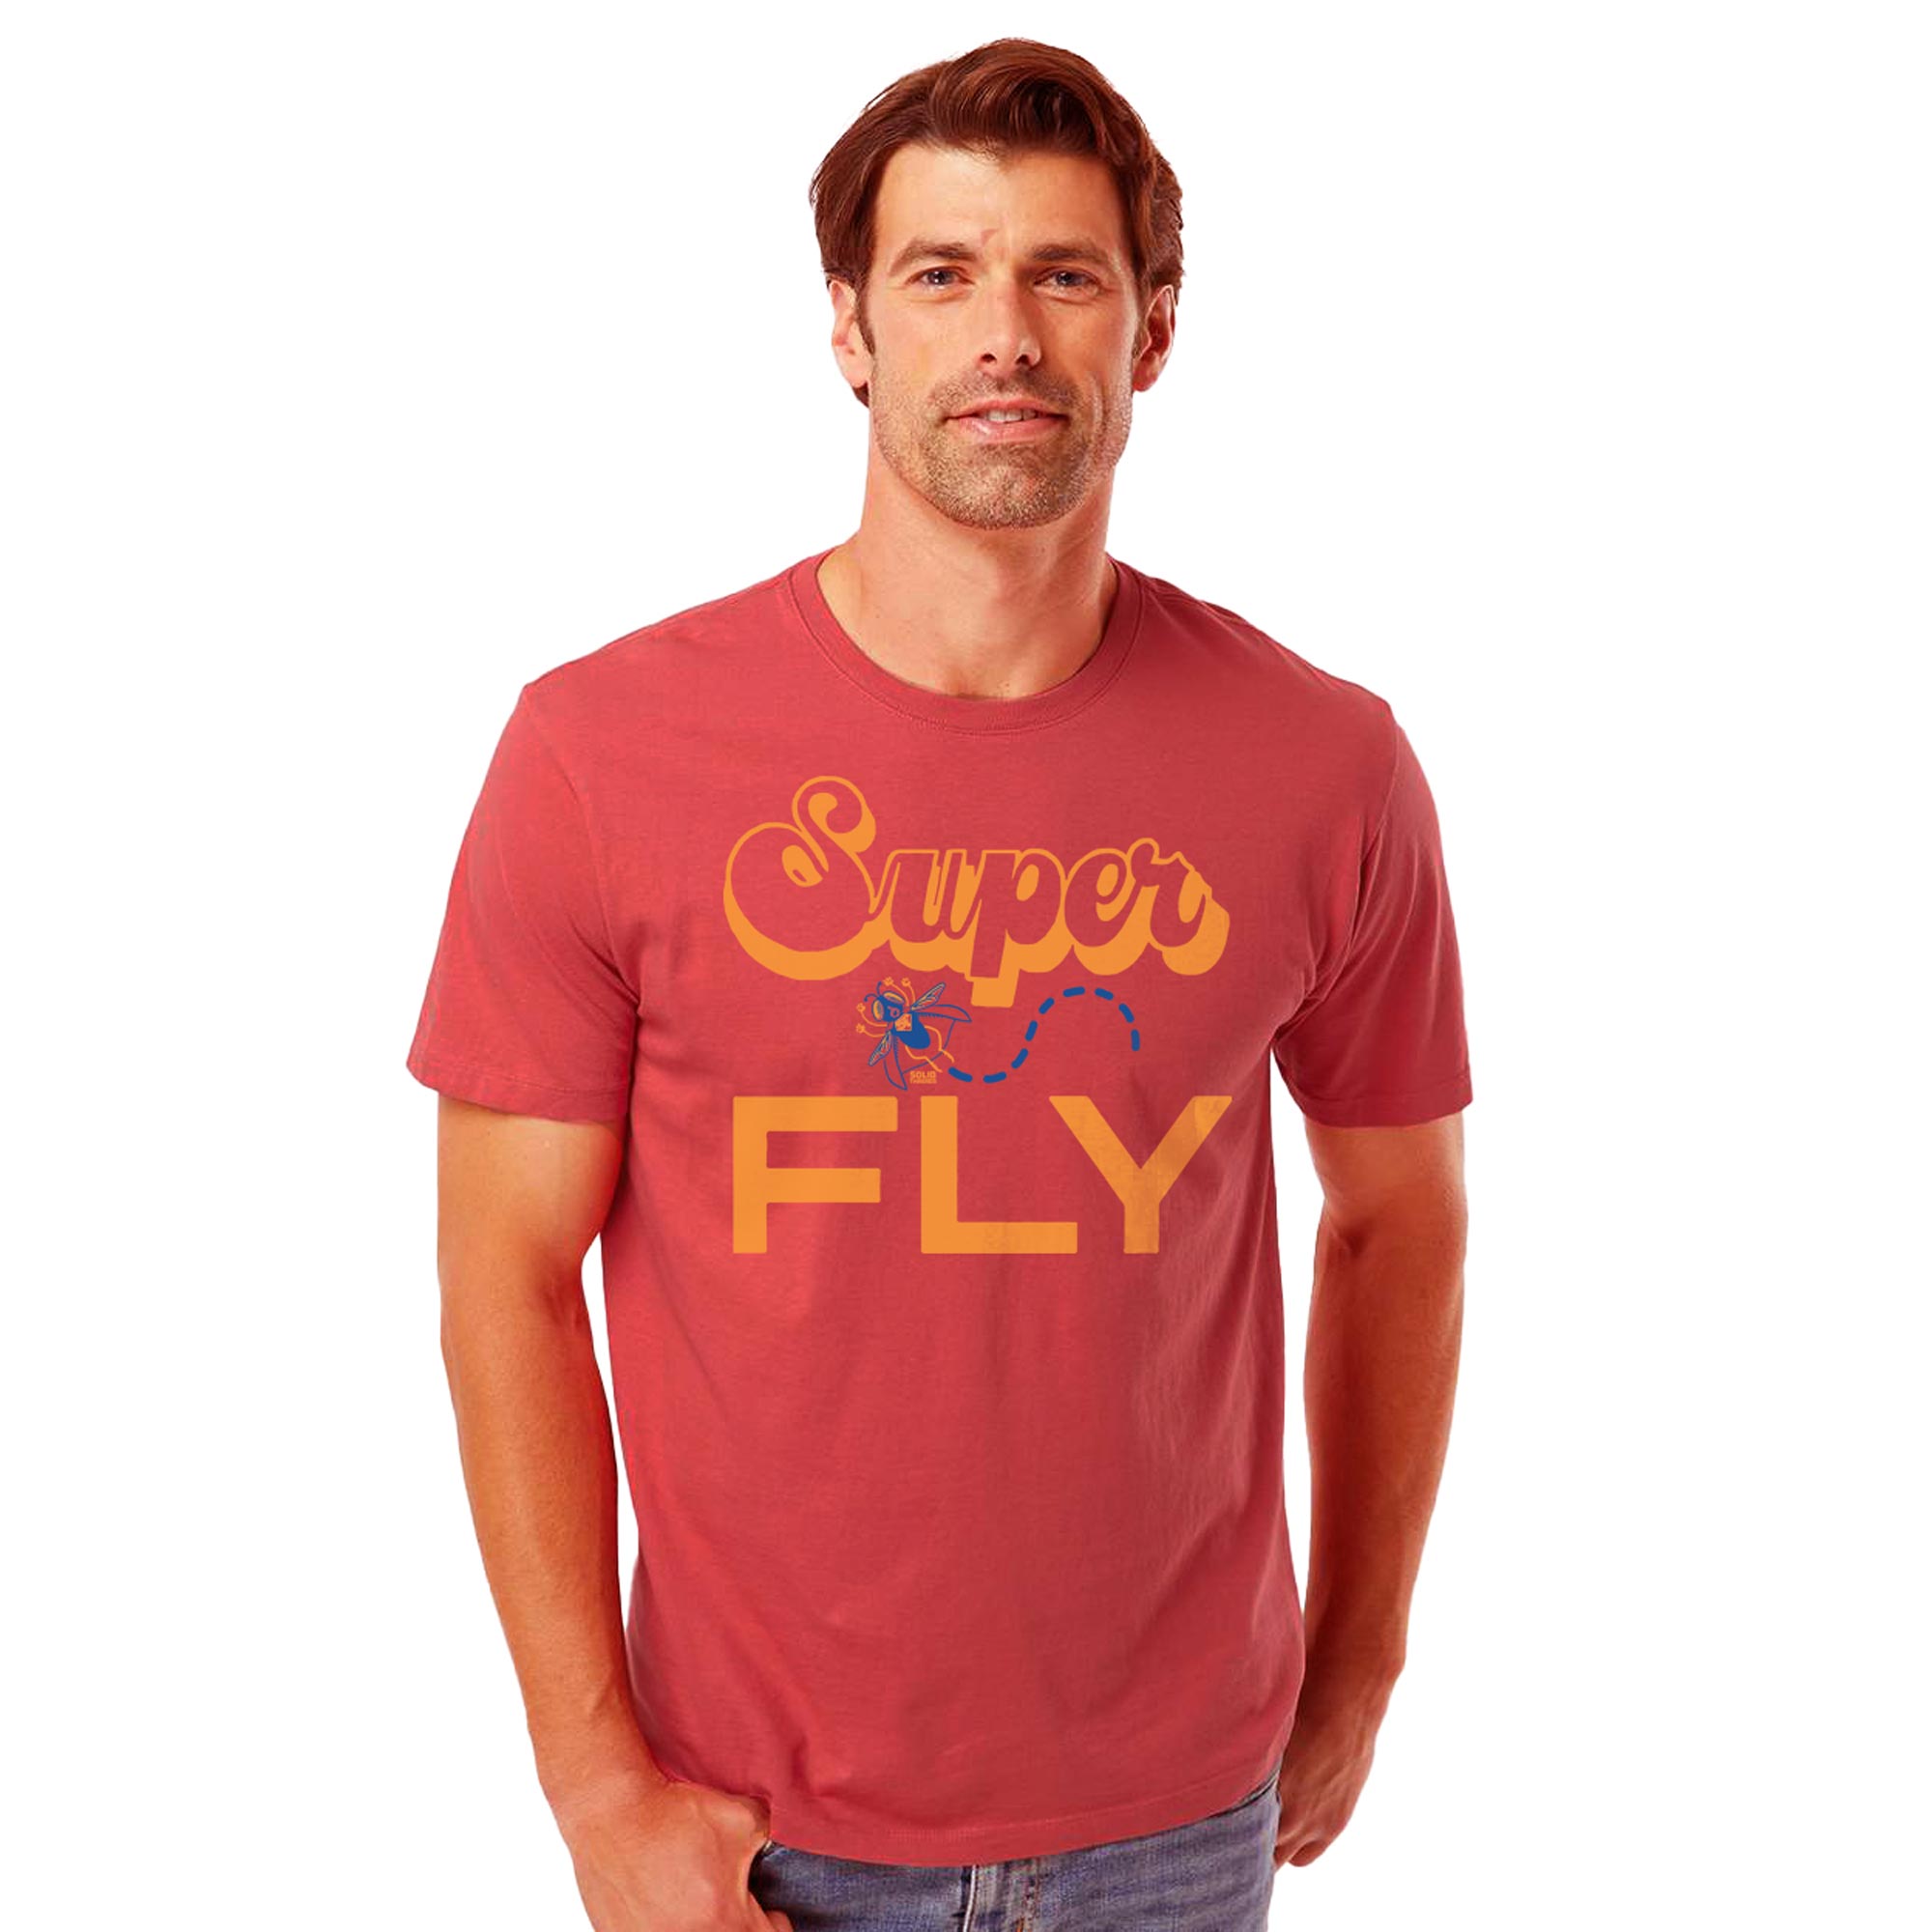 Superfly Vintage Organic Cotton T-shirt | Funny Curtis Mayfield  Tee On Model | Solid Threads